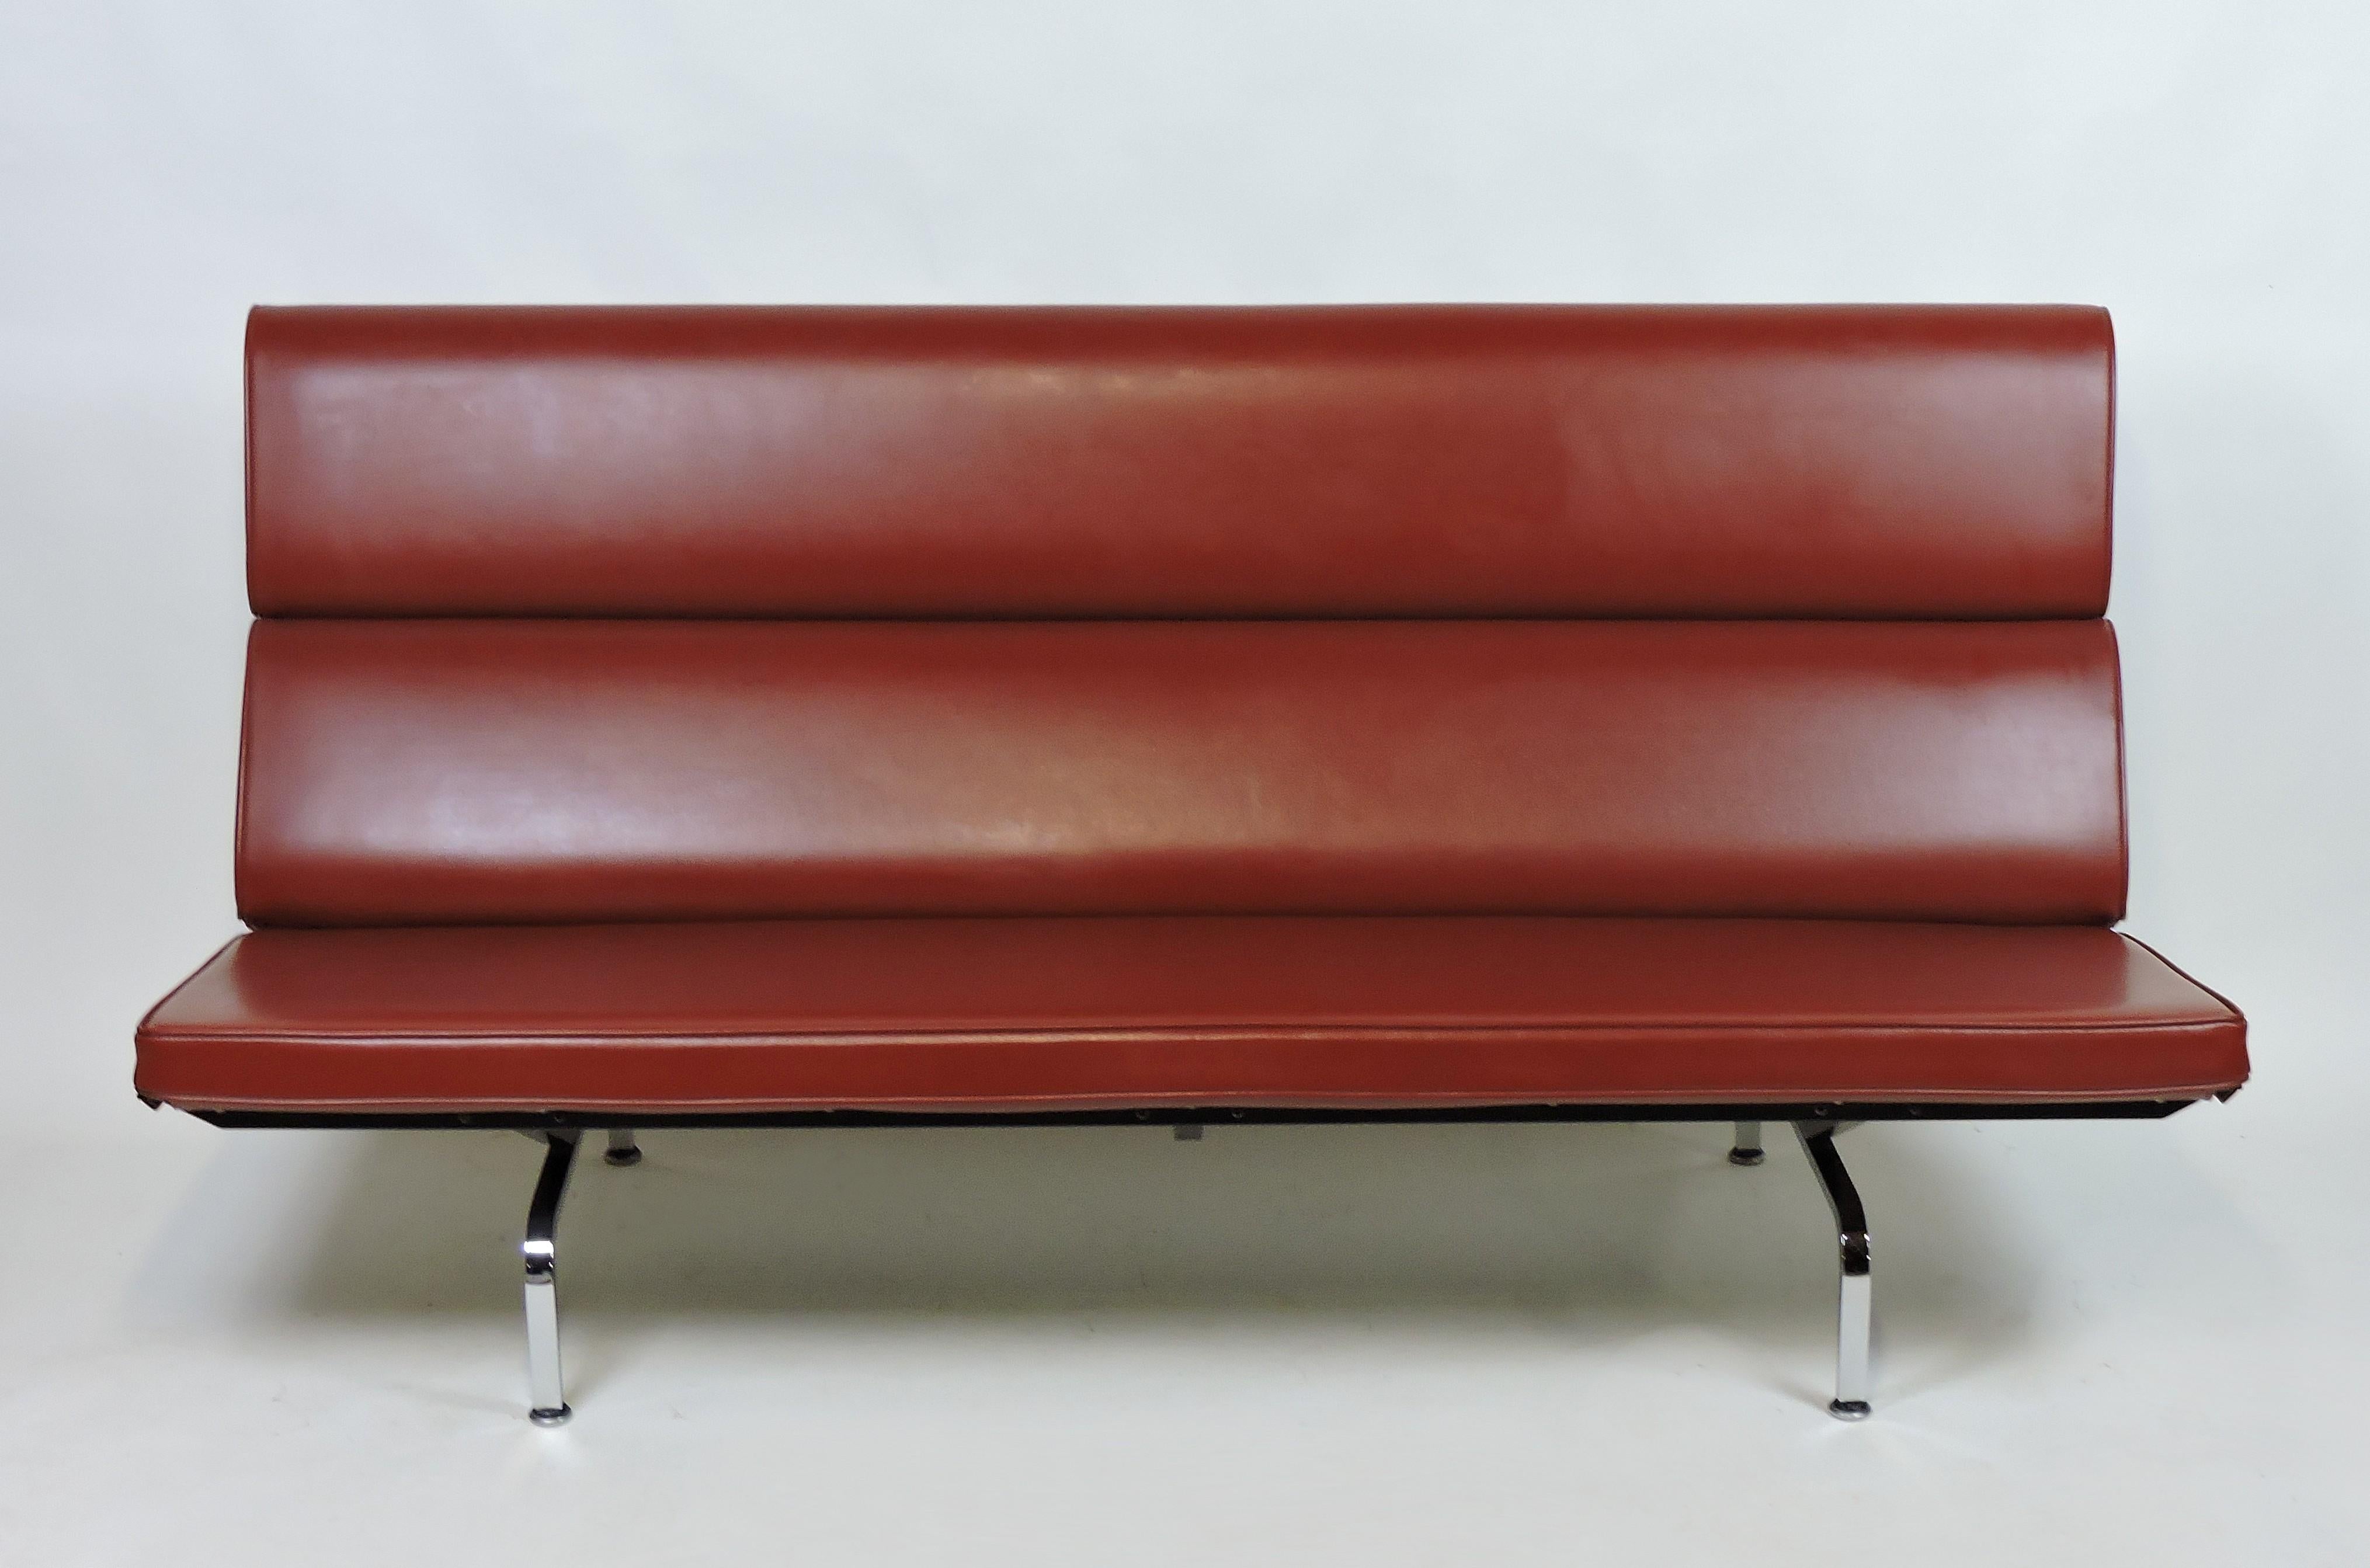 Sleek and handsome iconic compact sofa designed by Charles and Ray Eames and manufactured by Herman Miller. Upholstered in a dark red Naugahyde, this very comfortable sofa does not fold down like earlier versions. Labeled with the Herman Miller